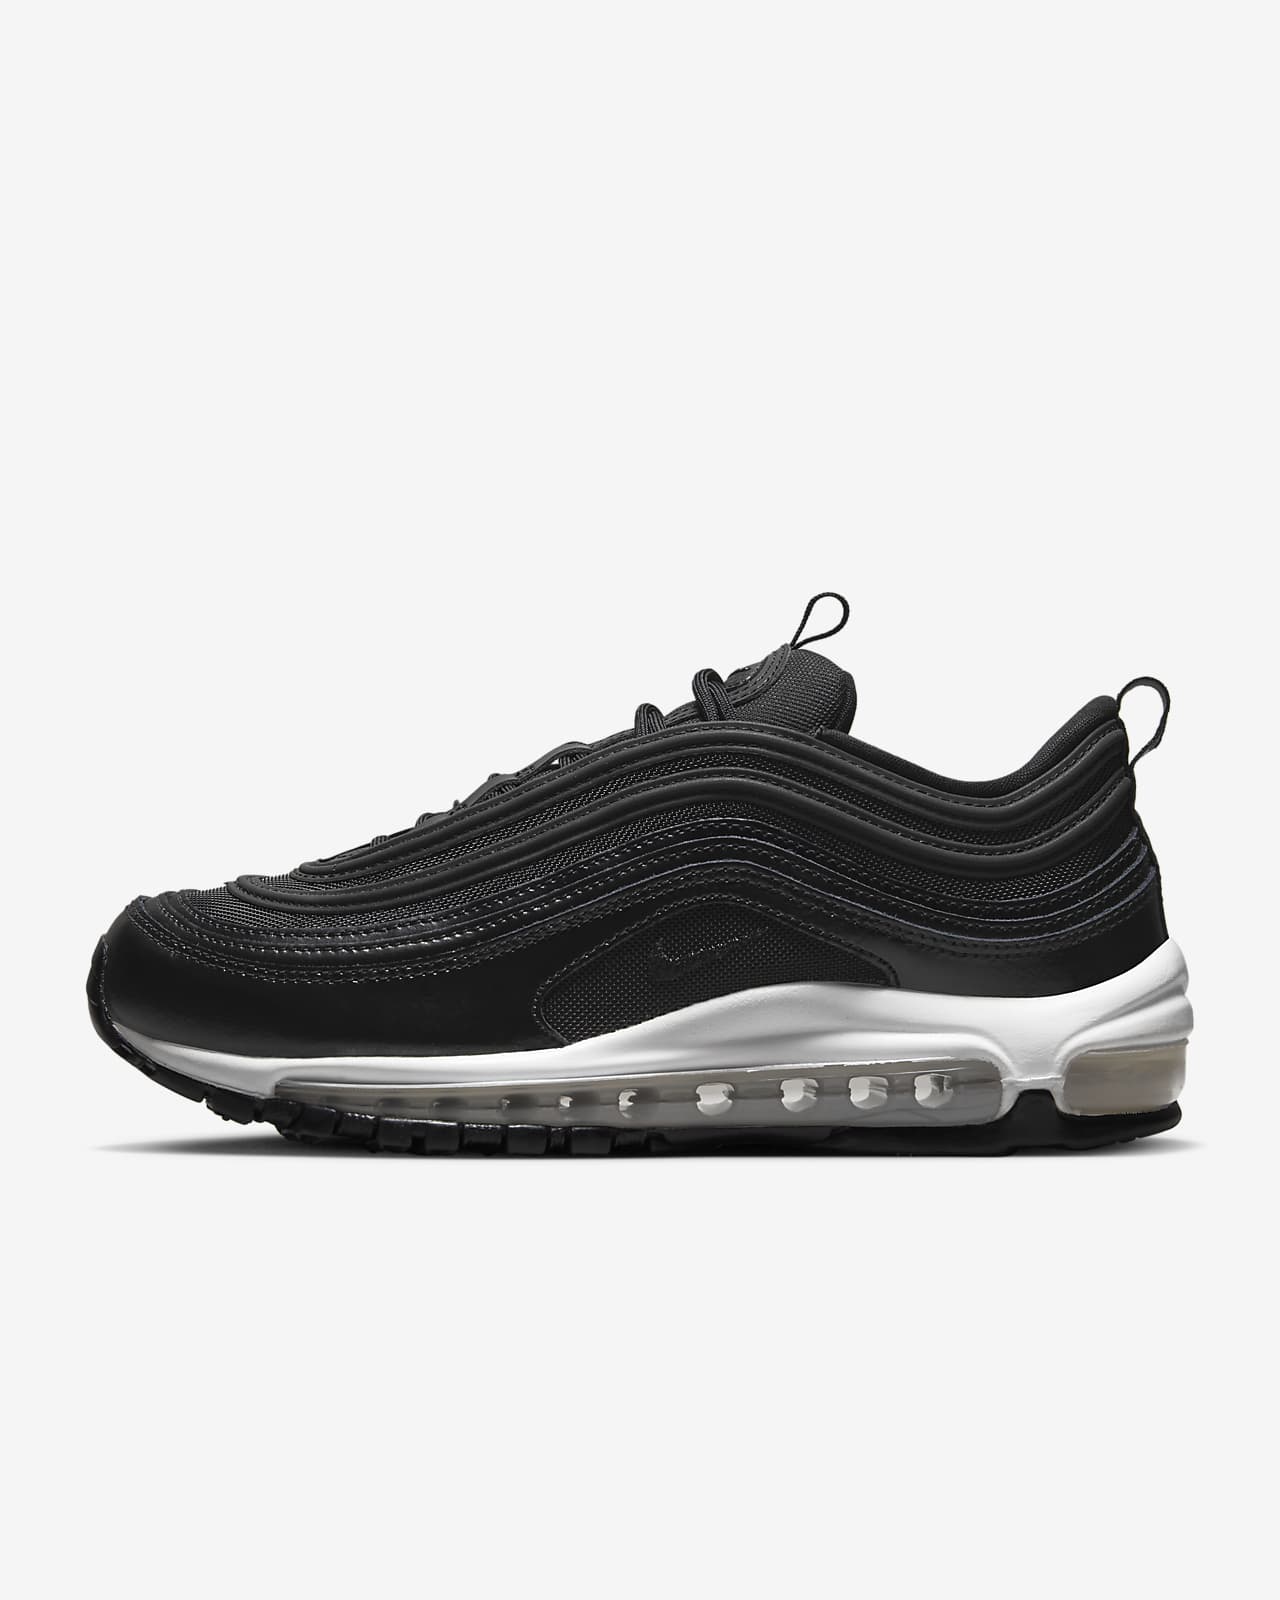 Specialist kwartaal Concurrenten Nike Air Max 97 Women's Shoes. Nike GB